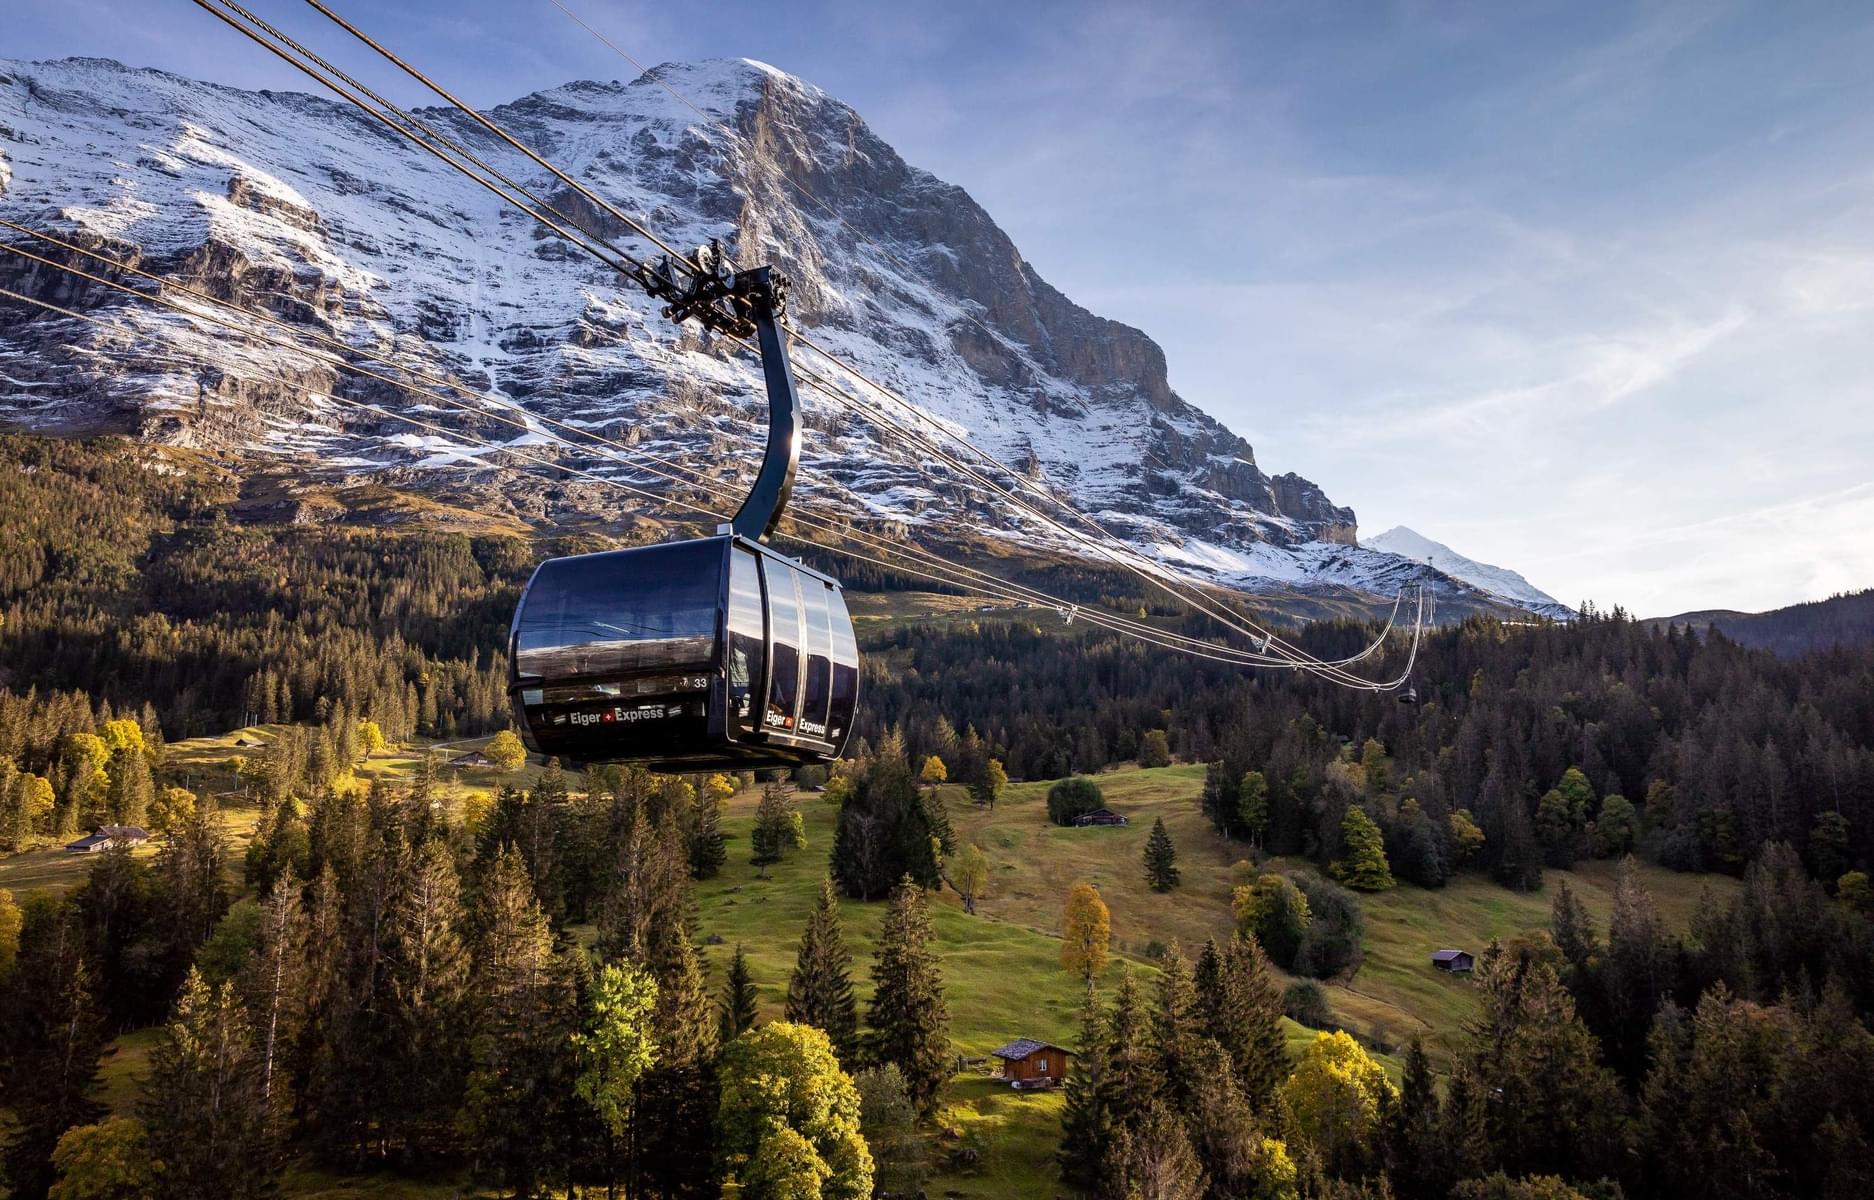 Take a ride on Eiger Express, the state-of-the-art V-Cableway